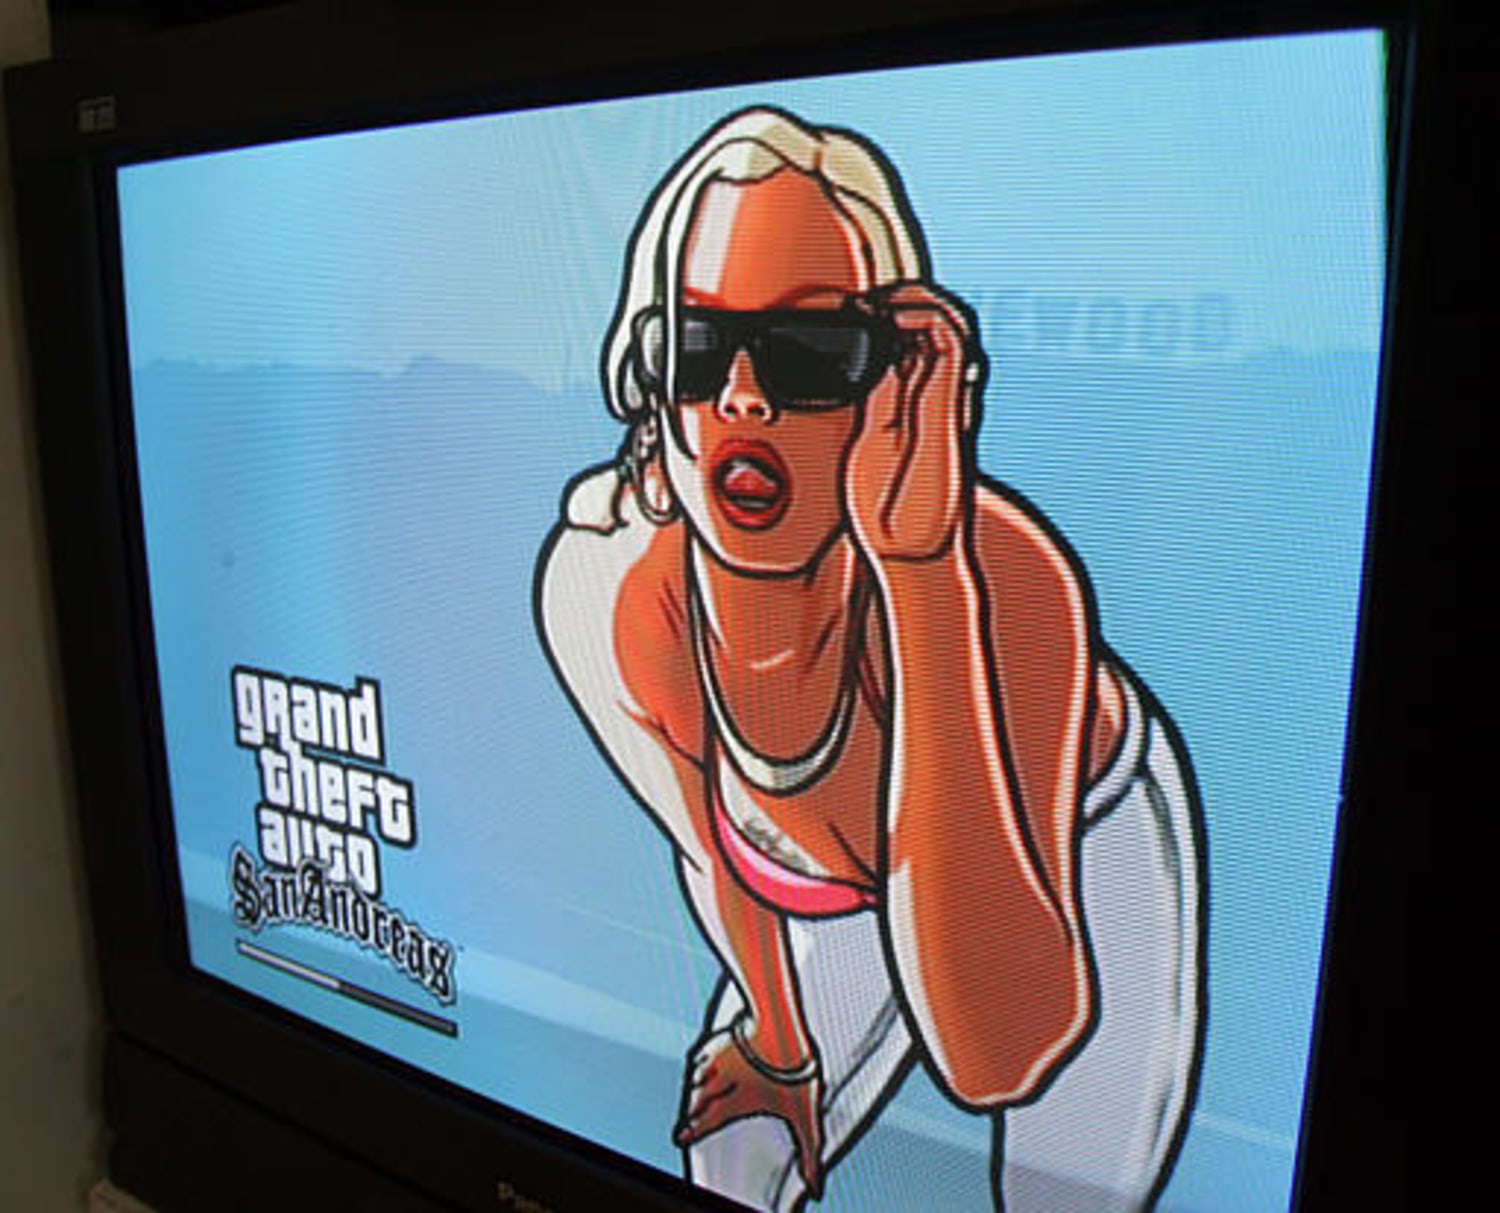 Grand Theft Auto: San Andreas Feature Preview - GameSpot